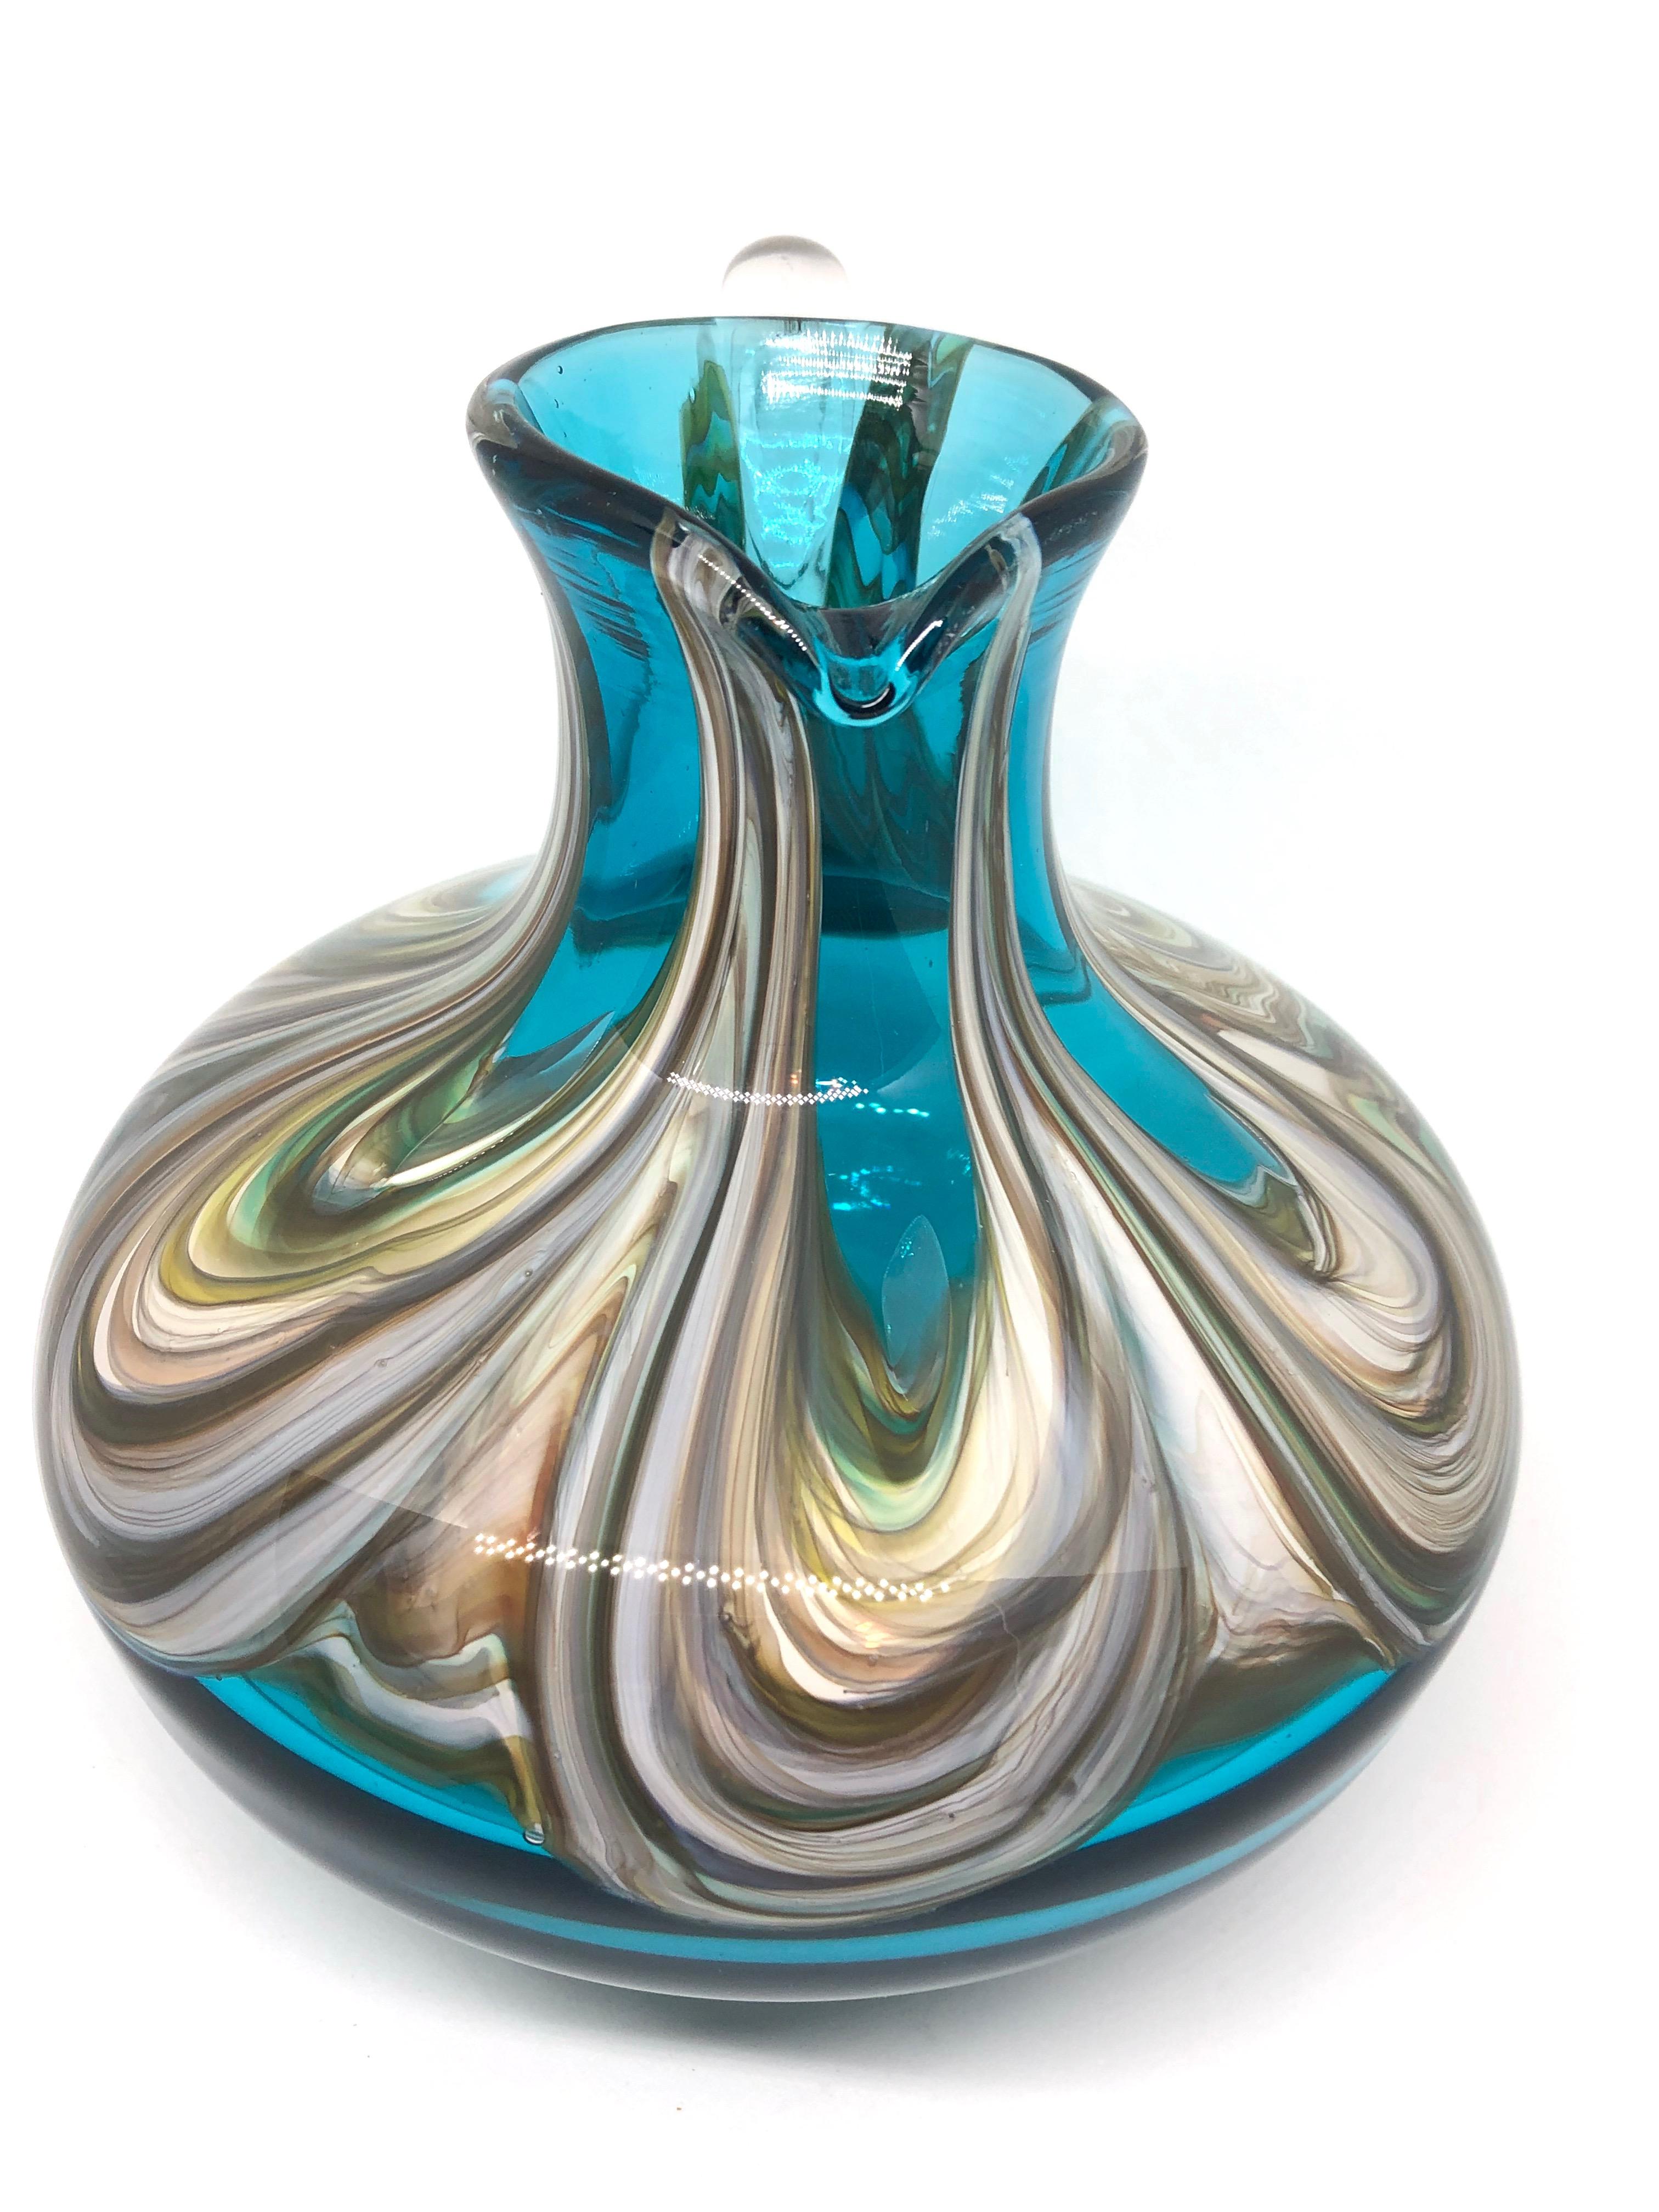 Hand-Crafted Blue and Multi-Color Swirl Glass Murano Venetian Vase, Italy, 1970s